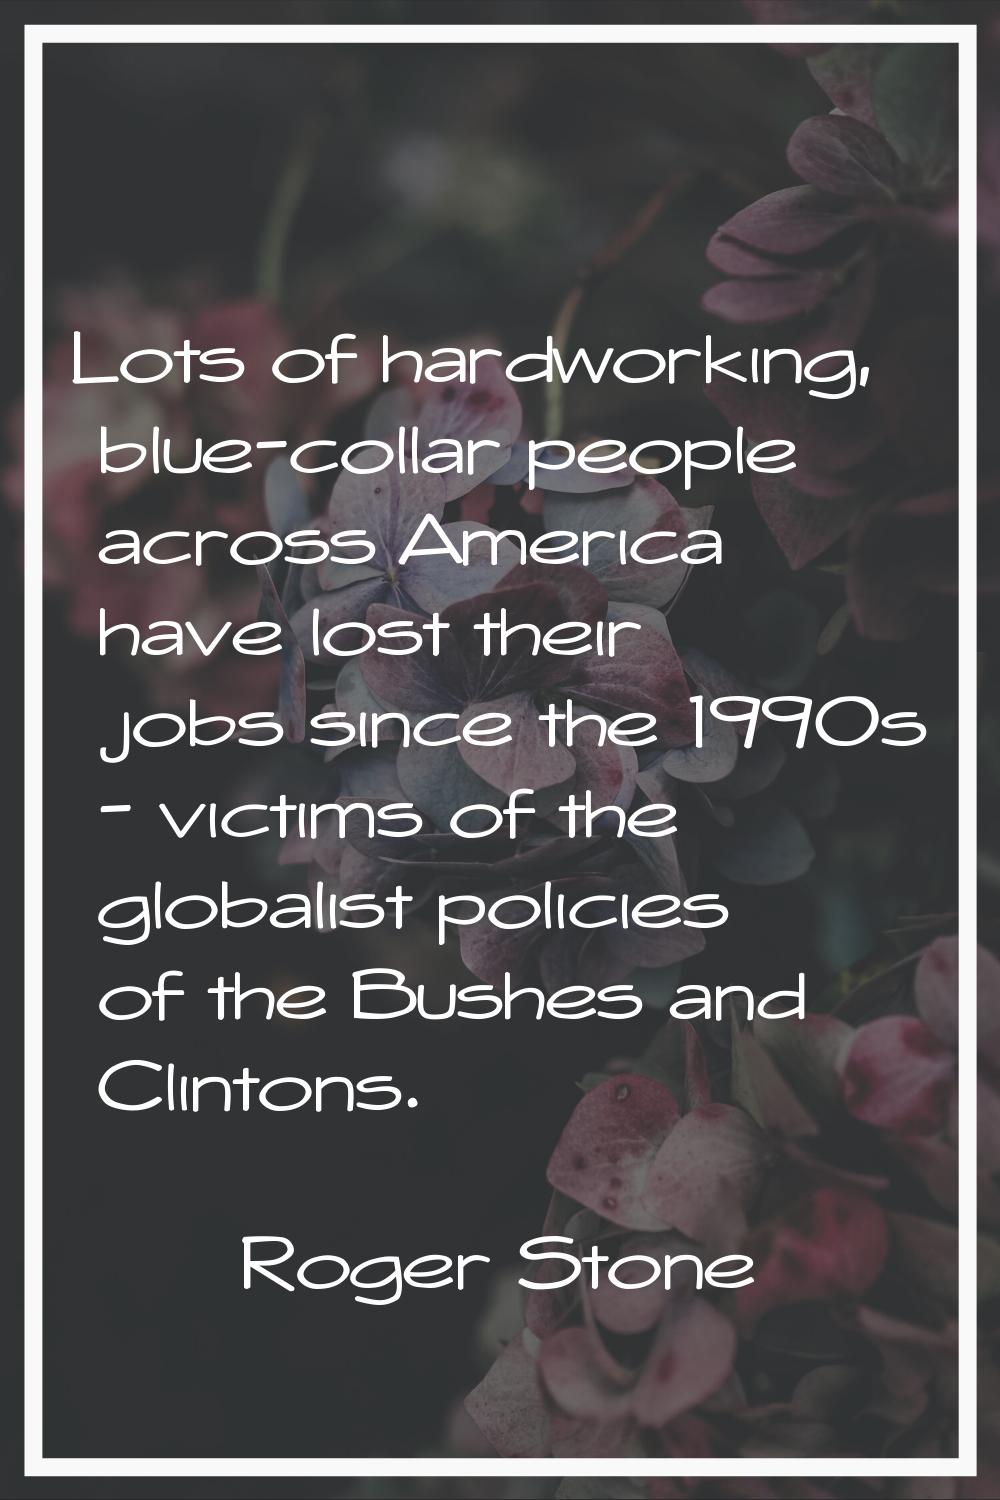 Lots of hardworking, blue-collar people across America have lost their jobs since the 1990s - victi